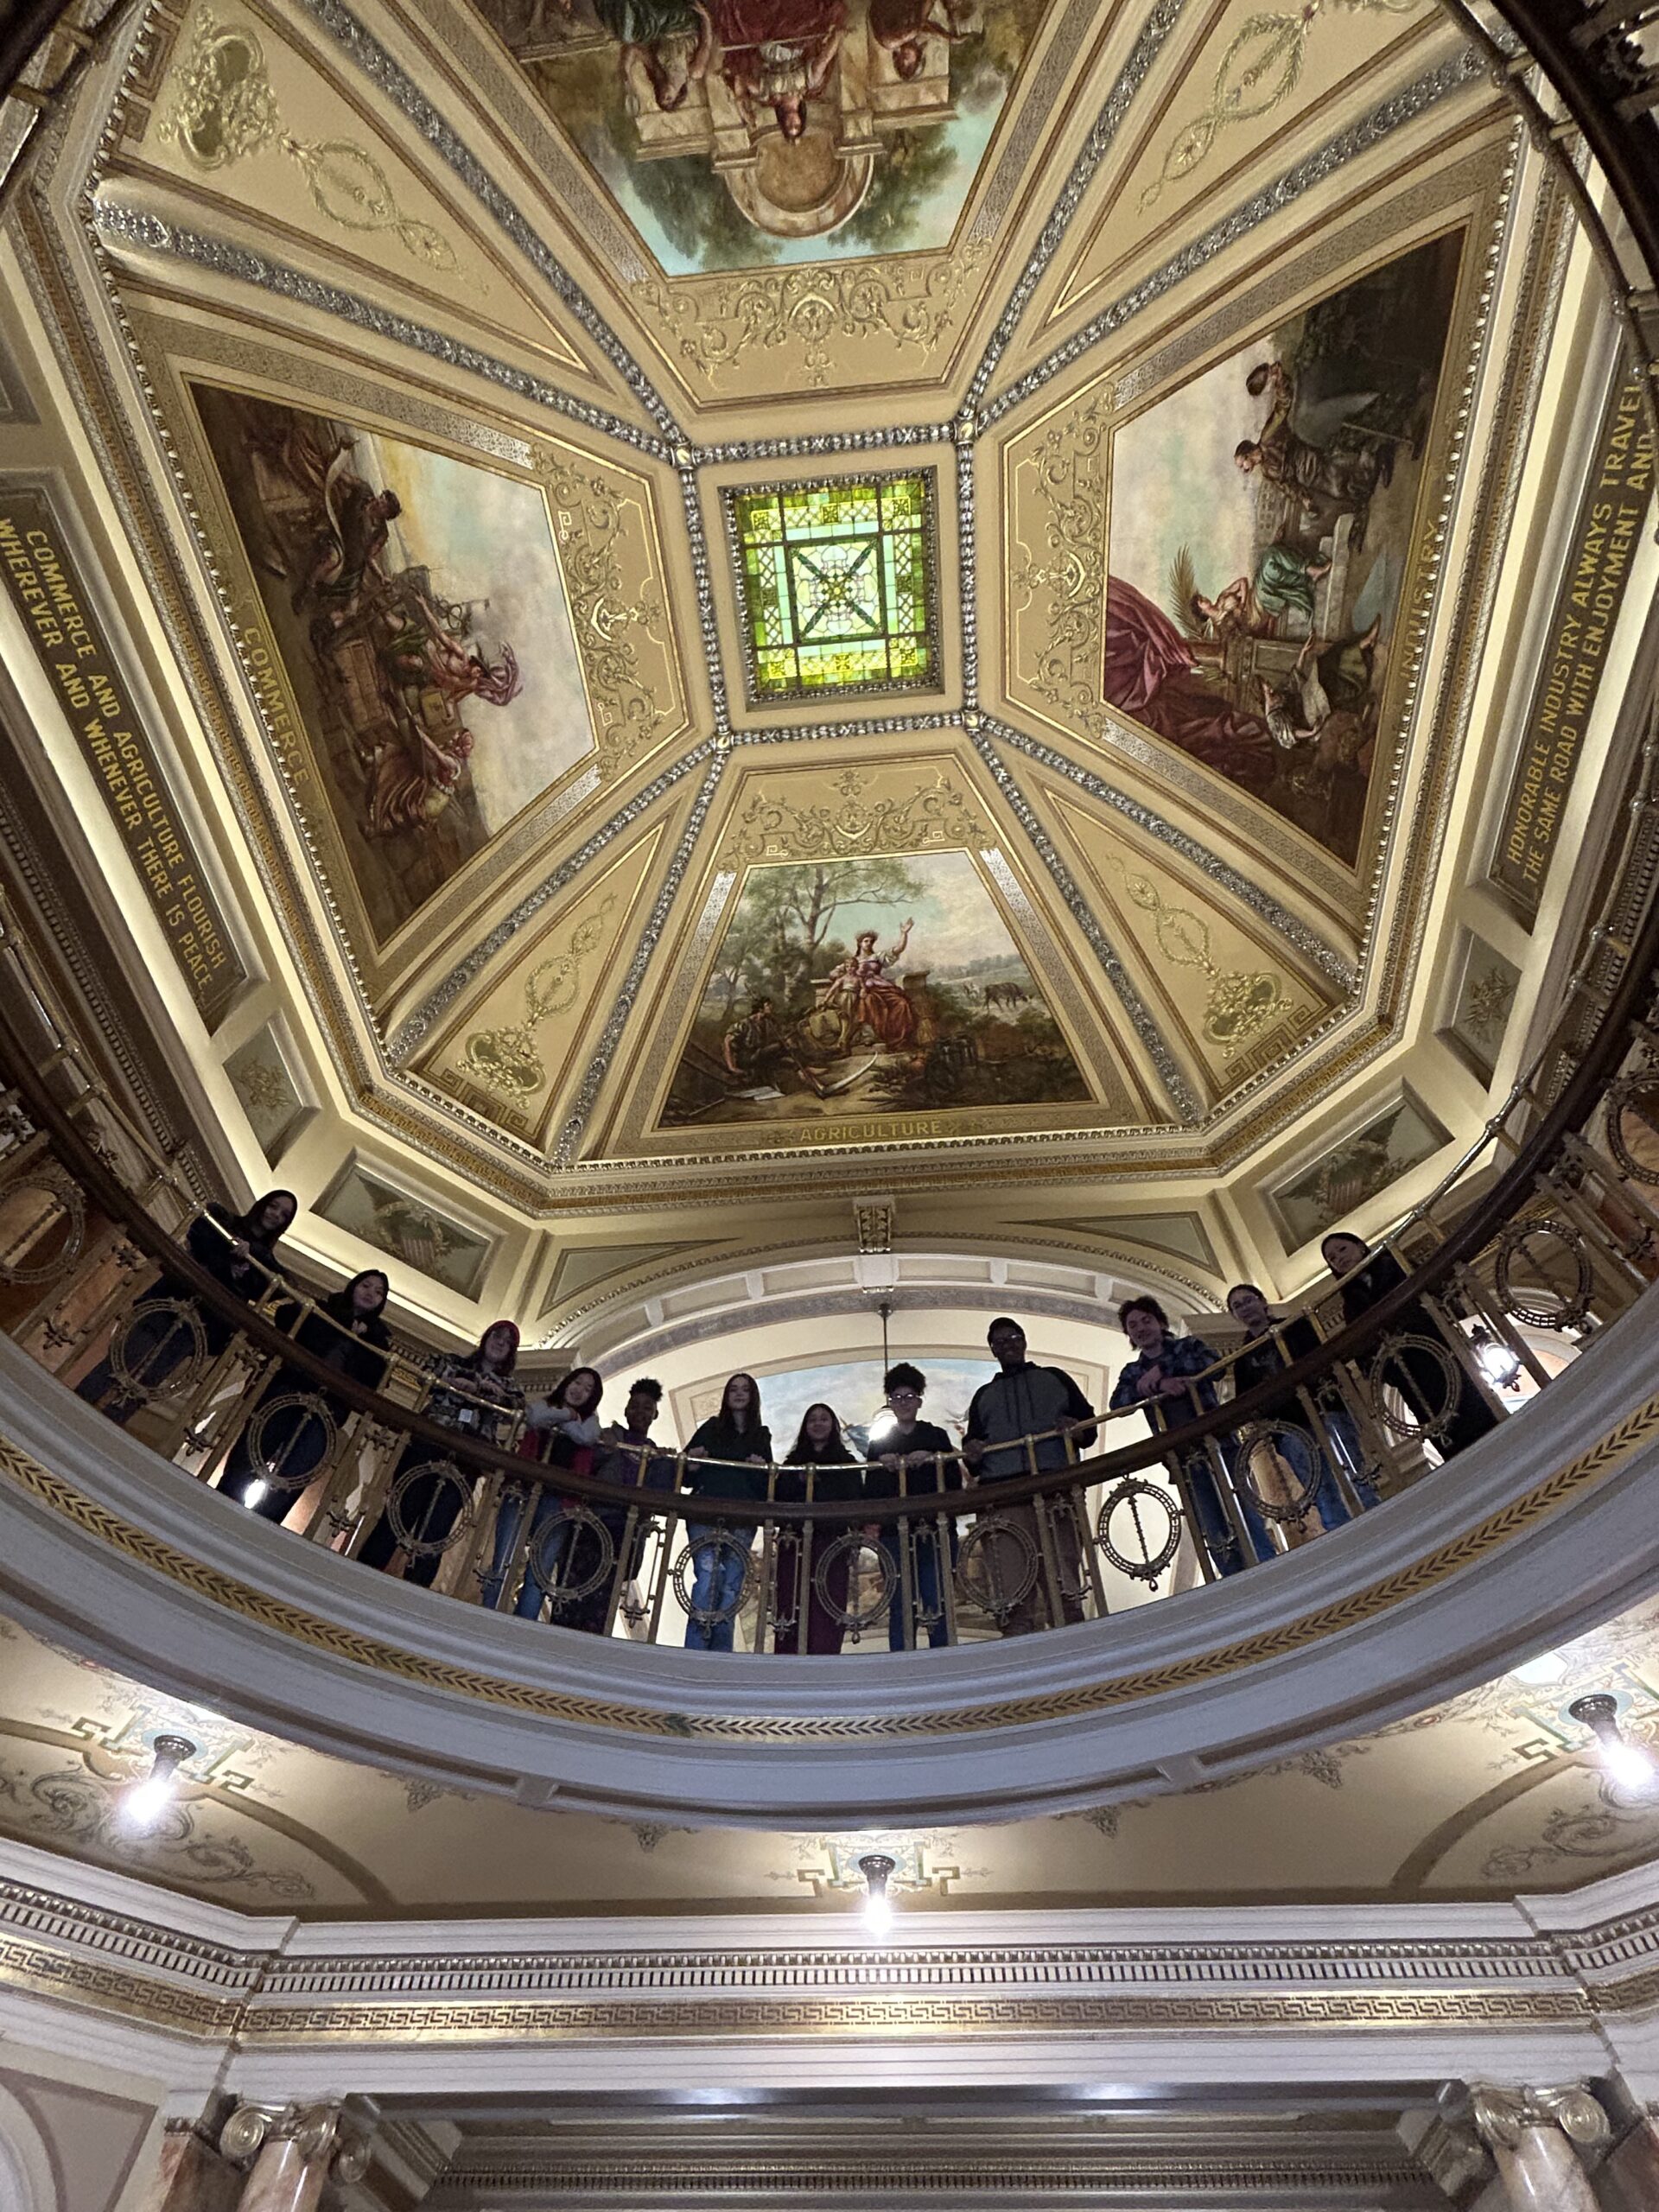 Green Bay West students pose in the rotunda of the Brown County Courthouse.